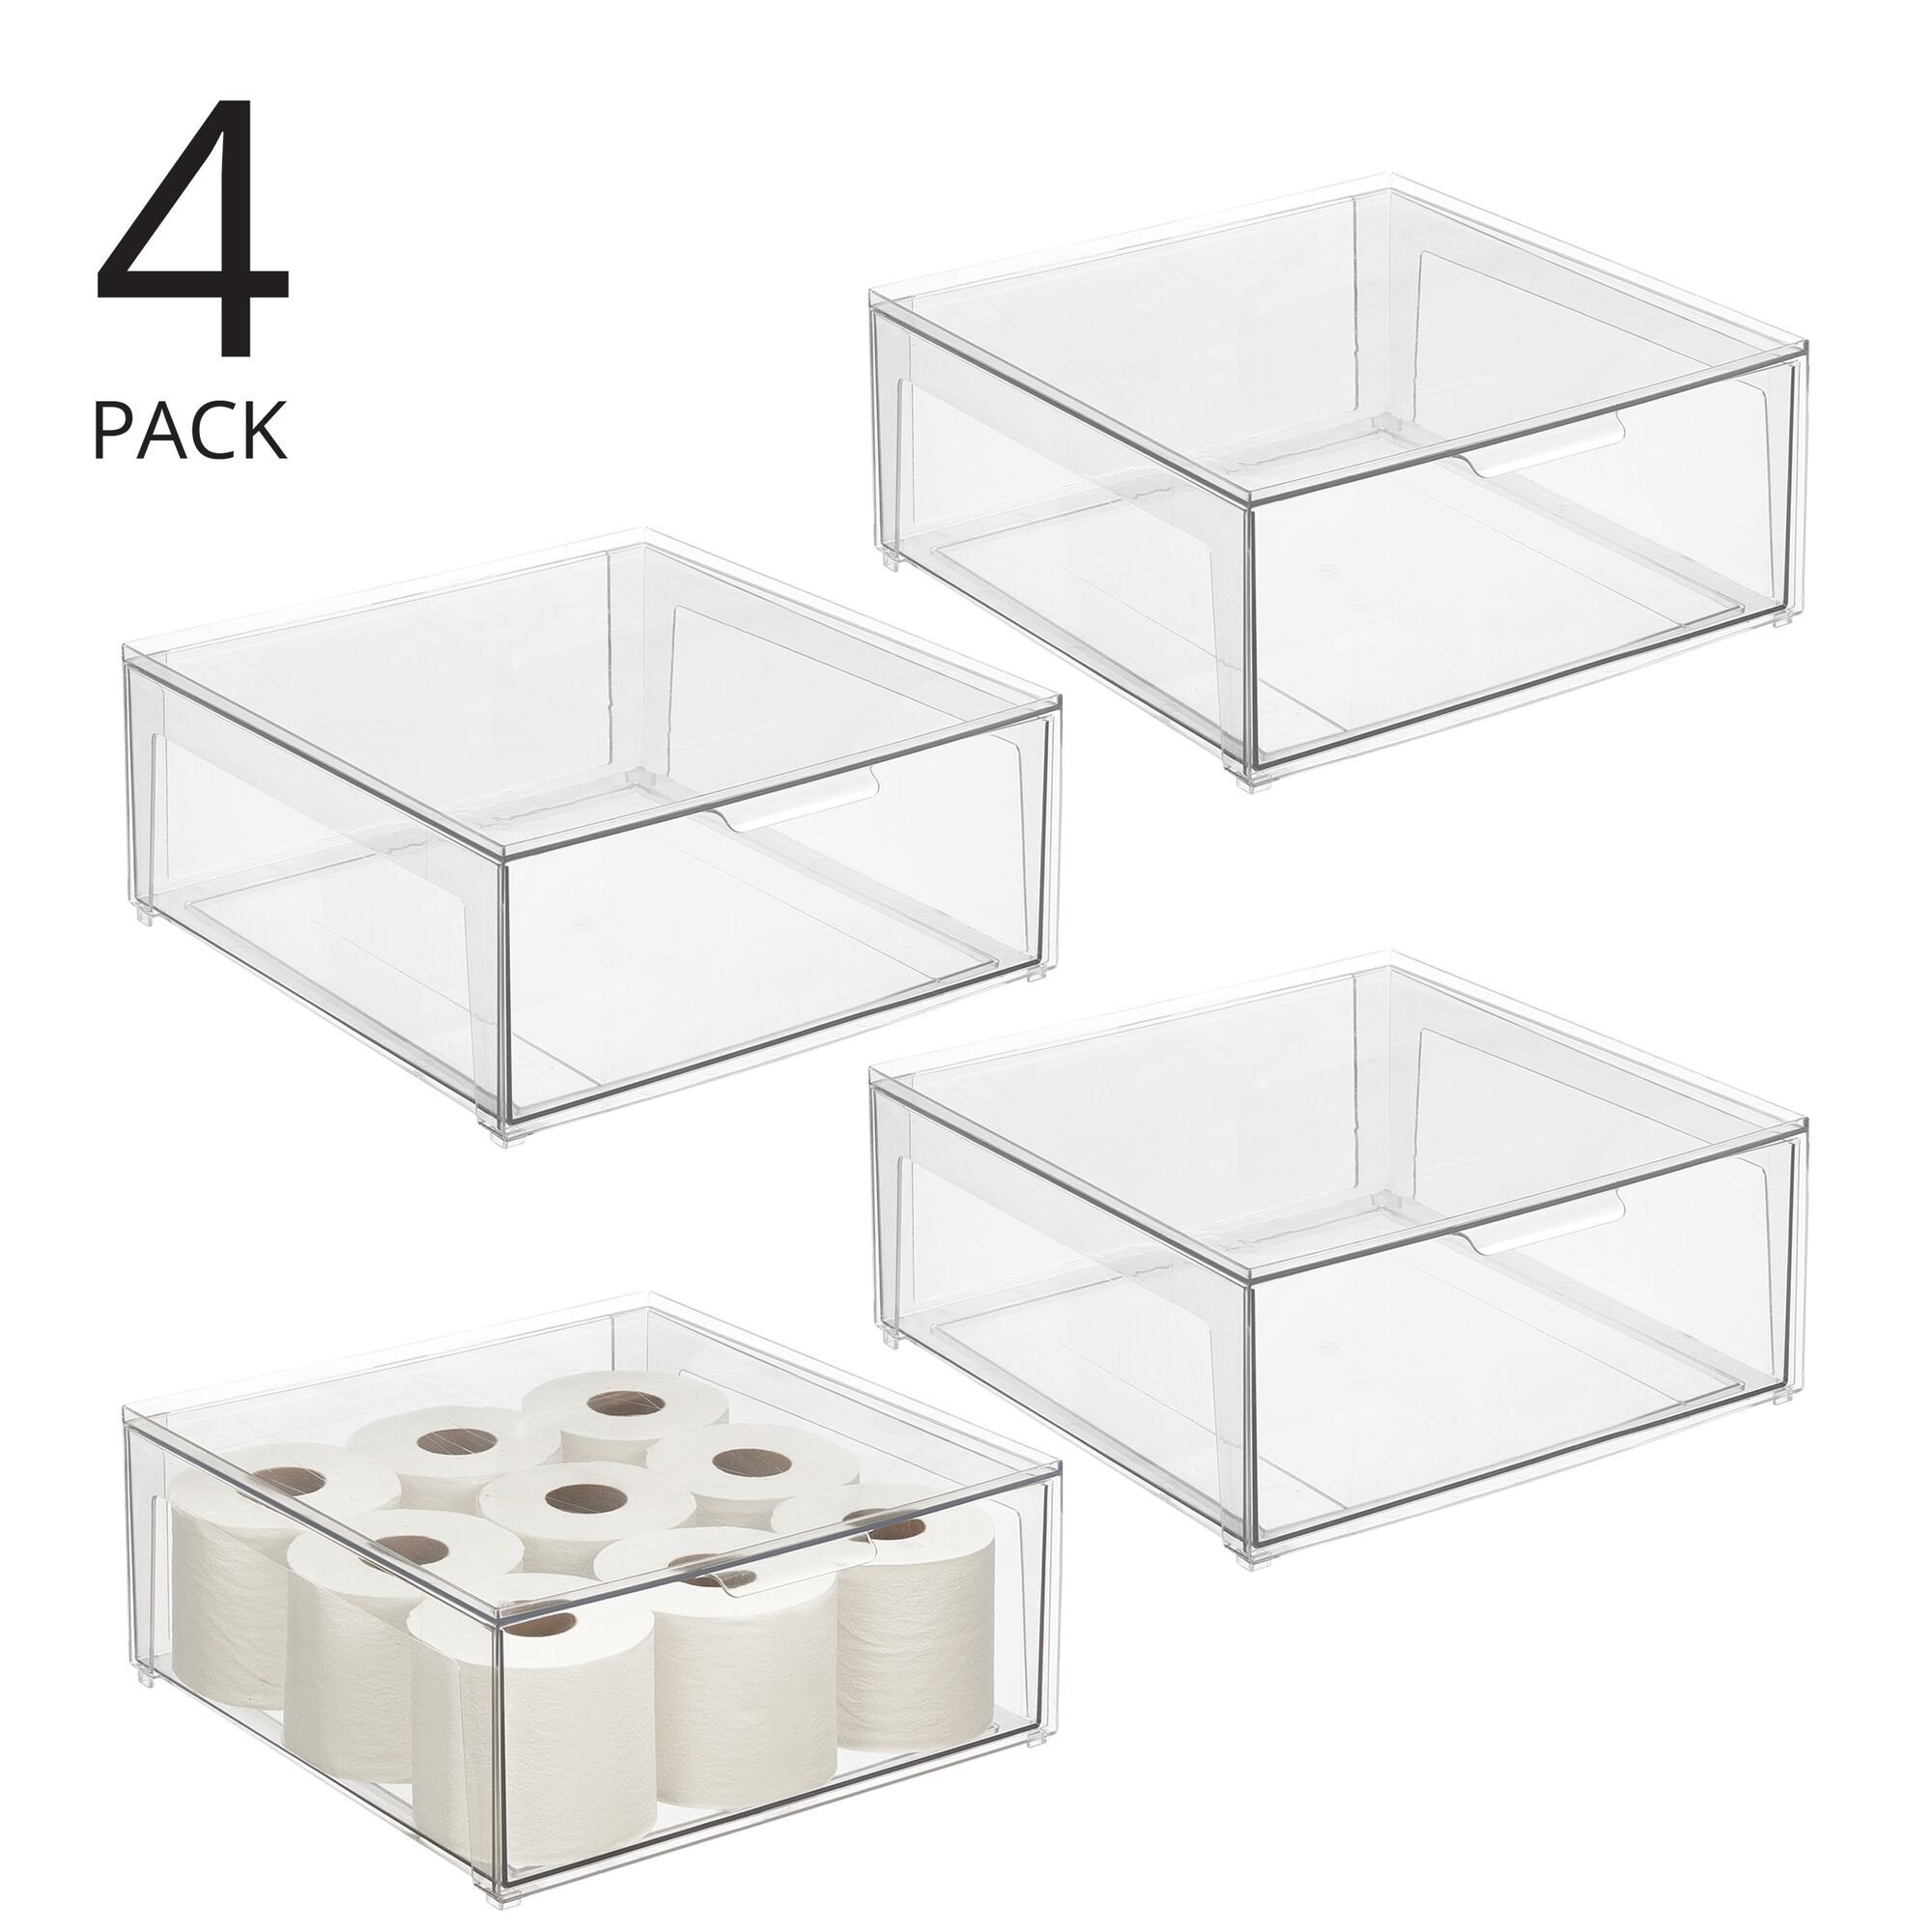 mDesign Fabric Stackable Square Cube Storage Organizer Box, 6 Pack - Pink/White